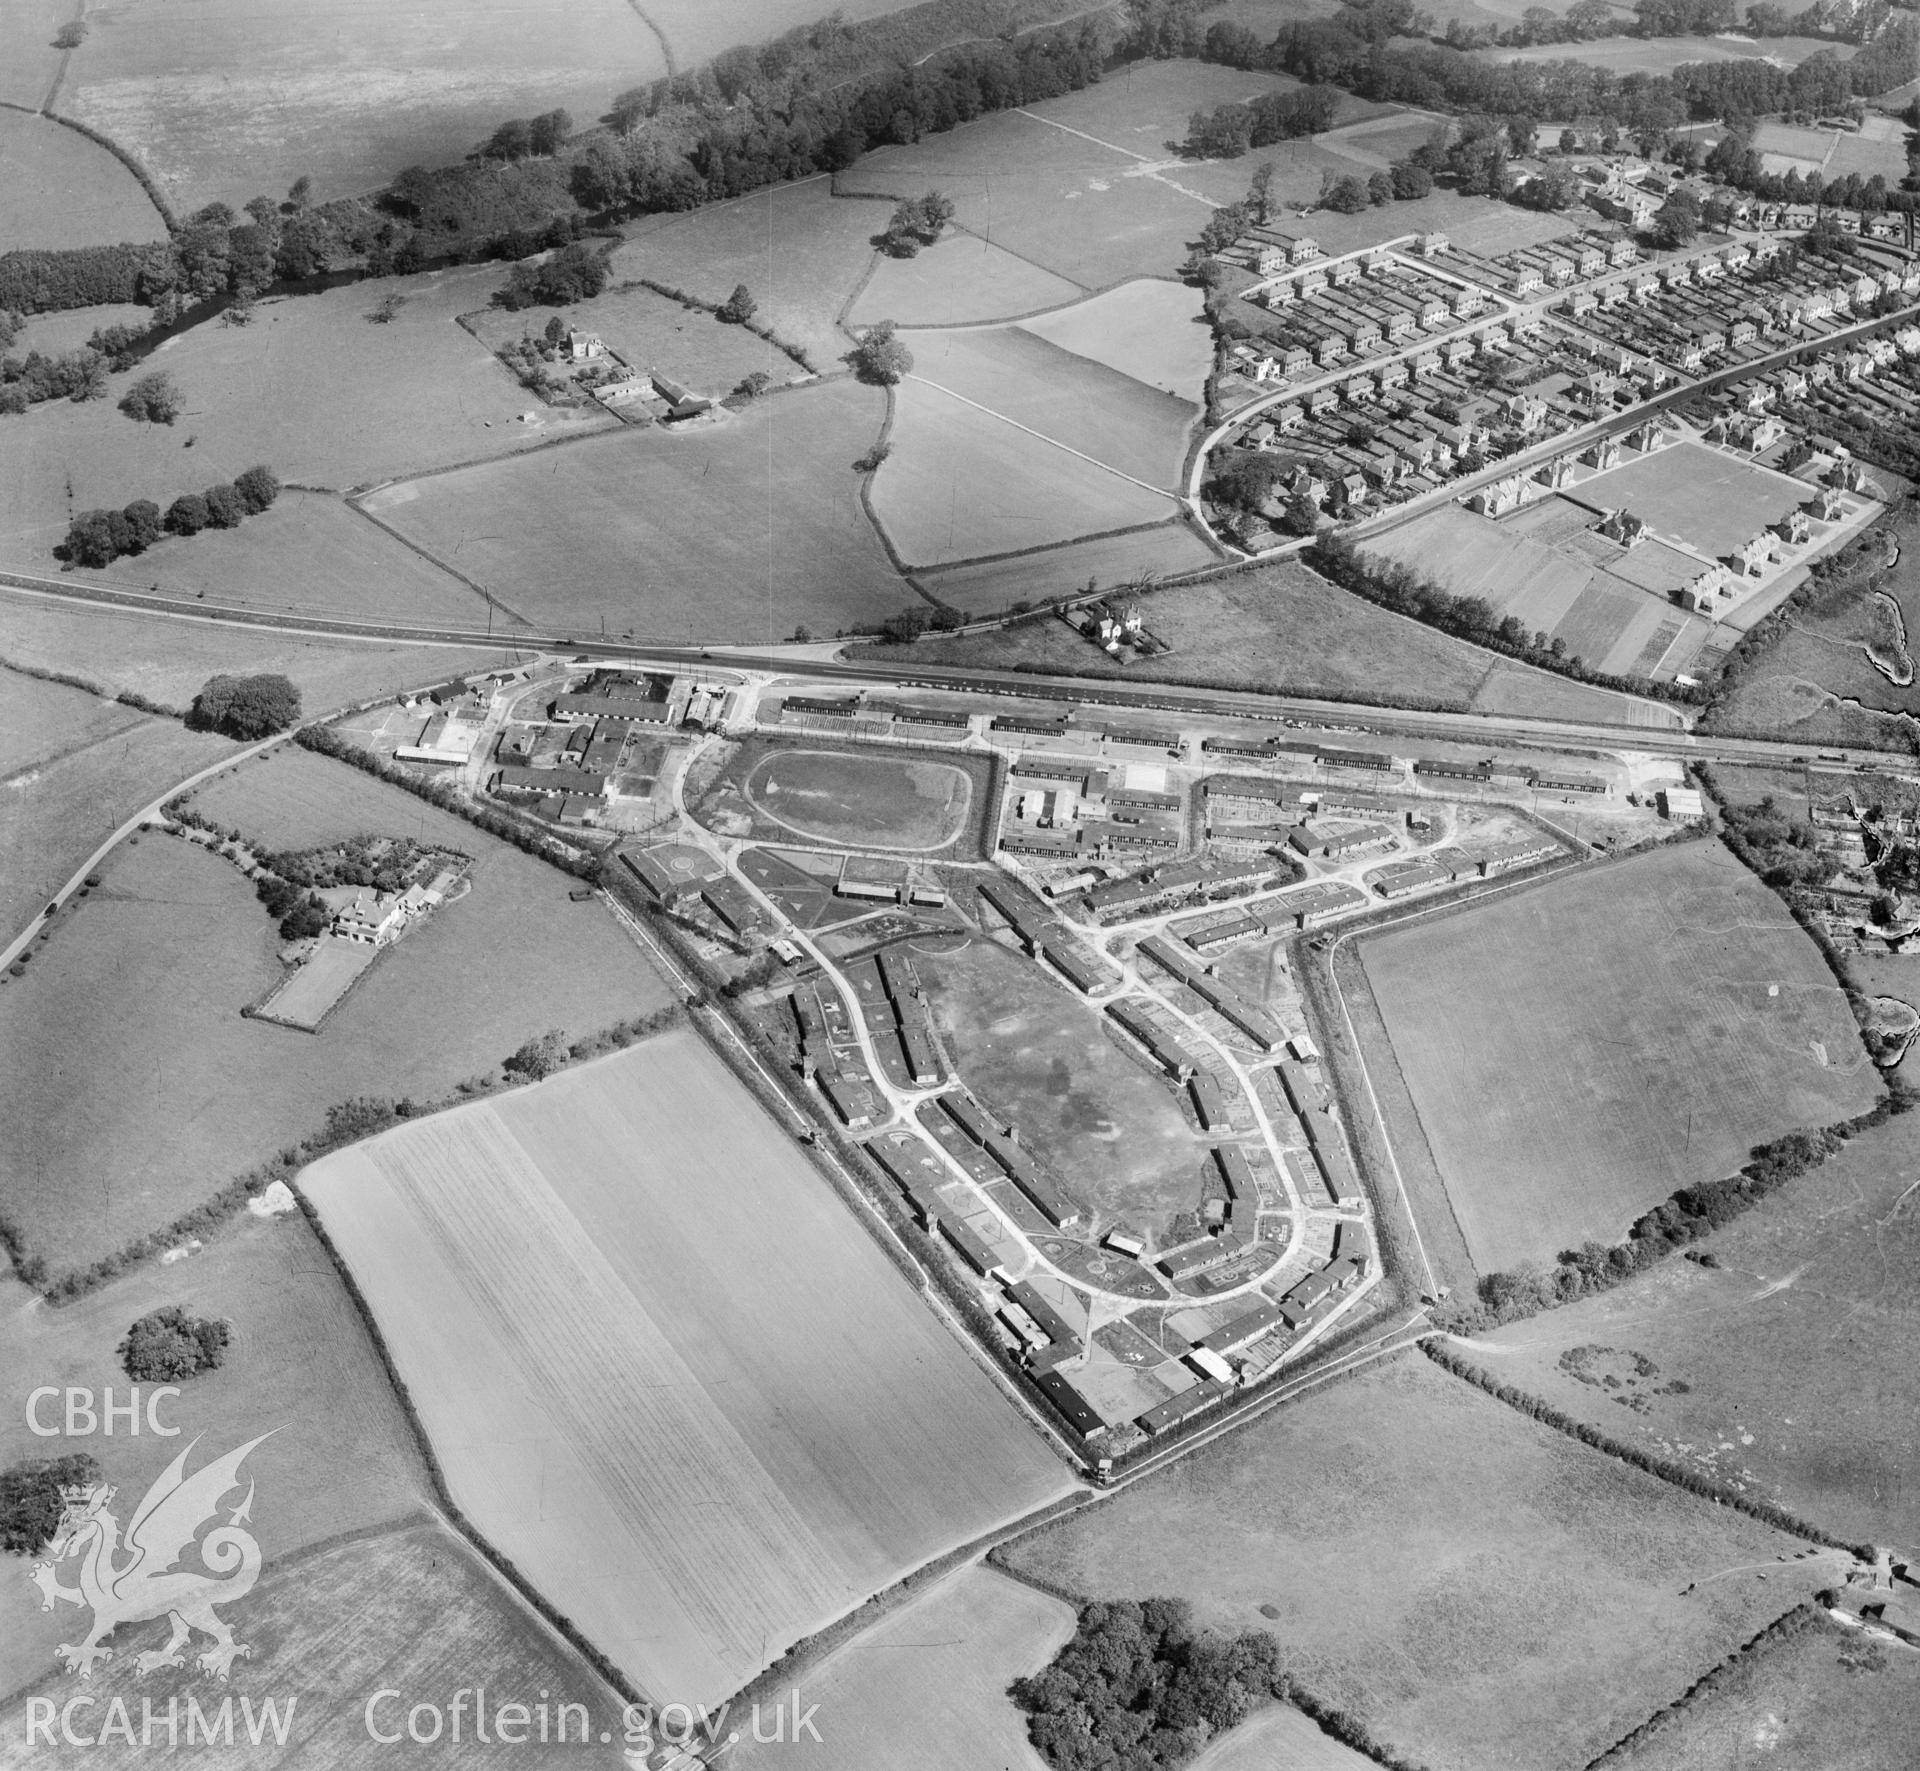 View of Island Farm POW camp - the photograph was commissioned by the Gee, Walker & Slater construction company in 1947 for possible reuse as a development site for new housing.